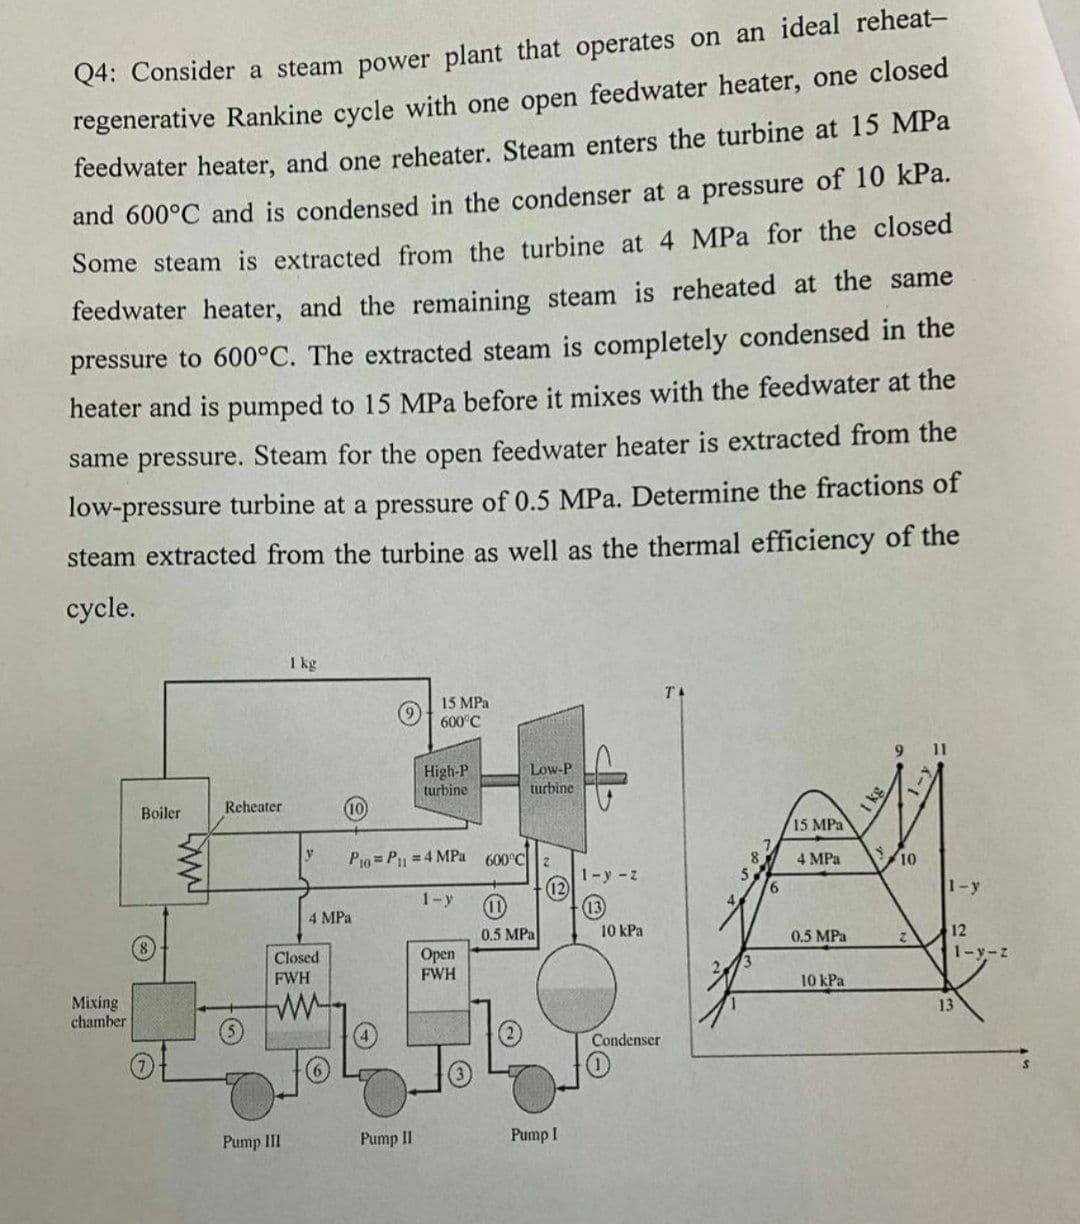 Q4: Consider a steam power plant that operates on an ideal reheat-
regenerative Rankine cycle with one open feedwater heater, one closed
feedwater heater, and one reheater. Steam enters the turbine at 15 MPa
and 600°C and is condensed in the condenser at a pressure of 10 kPa.
Some steam is extracted from the turbine at 4 MPa for the closed
feedwater heater, and the remaining steam is reheated at the same
pressure to 600°C. The extracted steam is completely condensed in the
heater and is pumped to 15 MPa before it mixes with the feedwater at the
same pressure. Steam for the open feedwater heater is extracted from the
low-pressure turbine at a pressure of 0.5 MPa. Determine the fractions of
steam extracted from the turbine as well as the thermal efficiency of the
сycle.
I kg
15 MPa
600 C
9
11
High-P
turbine
Low-P
turbine
Boiler
Reheater
10
15 MPa
P10 = P1 = 4 MPa 600°C
4 MPa
10
1-y -z
(12
13
1-y
9.
1-y
4 MPa
0.5 MPa
10 kPa
0.5 MPa
12
Open
FWH
Closed
1-y-z
FWH
10 kPa
Mixing
chamber
13
Condenser
Pump III
Pump II
Pump I
